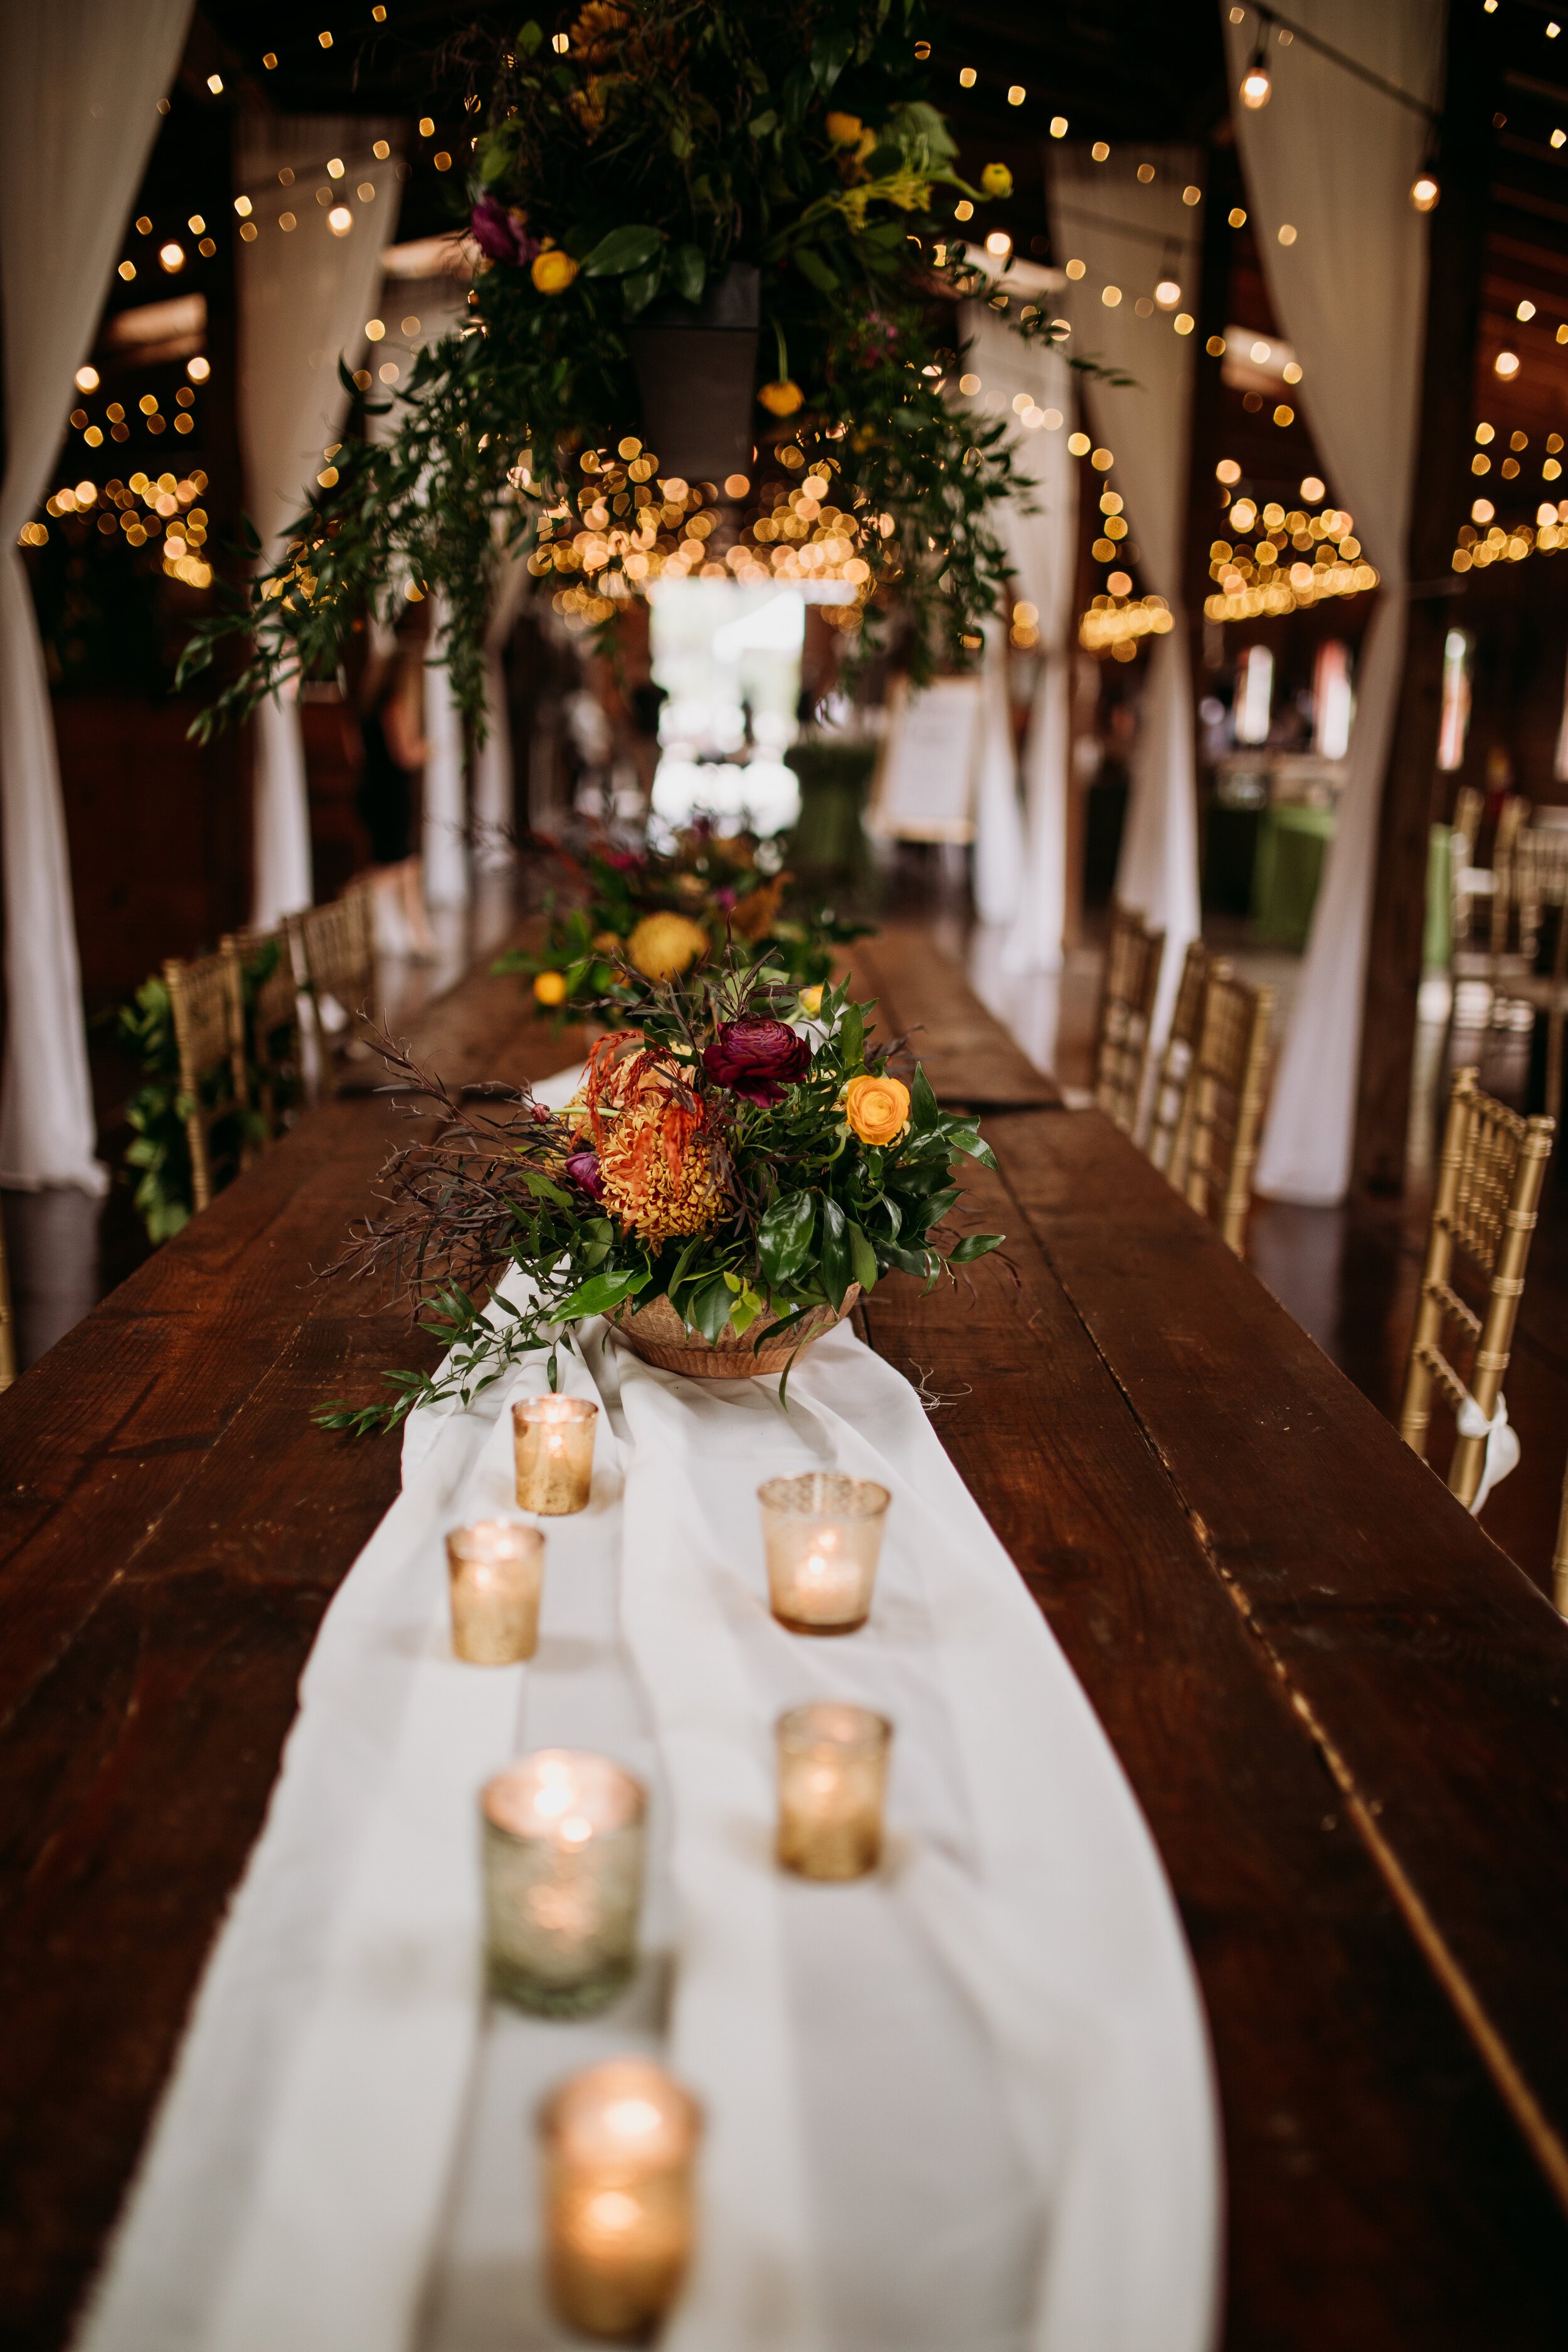 ivory-and-beau-florals-alex-and-david-red-gate-farms-wedding-flowers-wedding-florals-savannah-wedding-savannah-florist-wedding-florist-colorful-rich-bold-inspiration-flowers-Bowles110.jpg